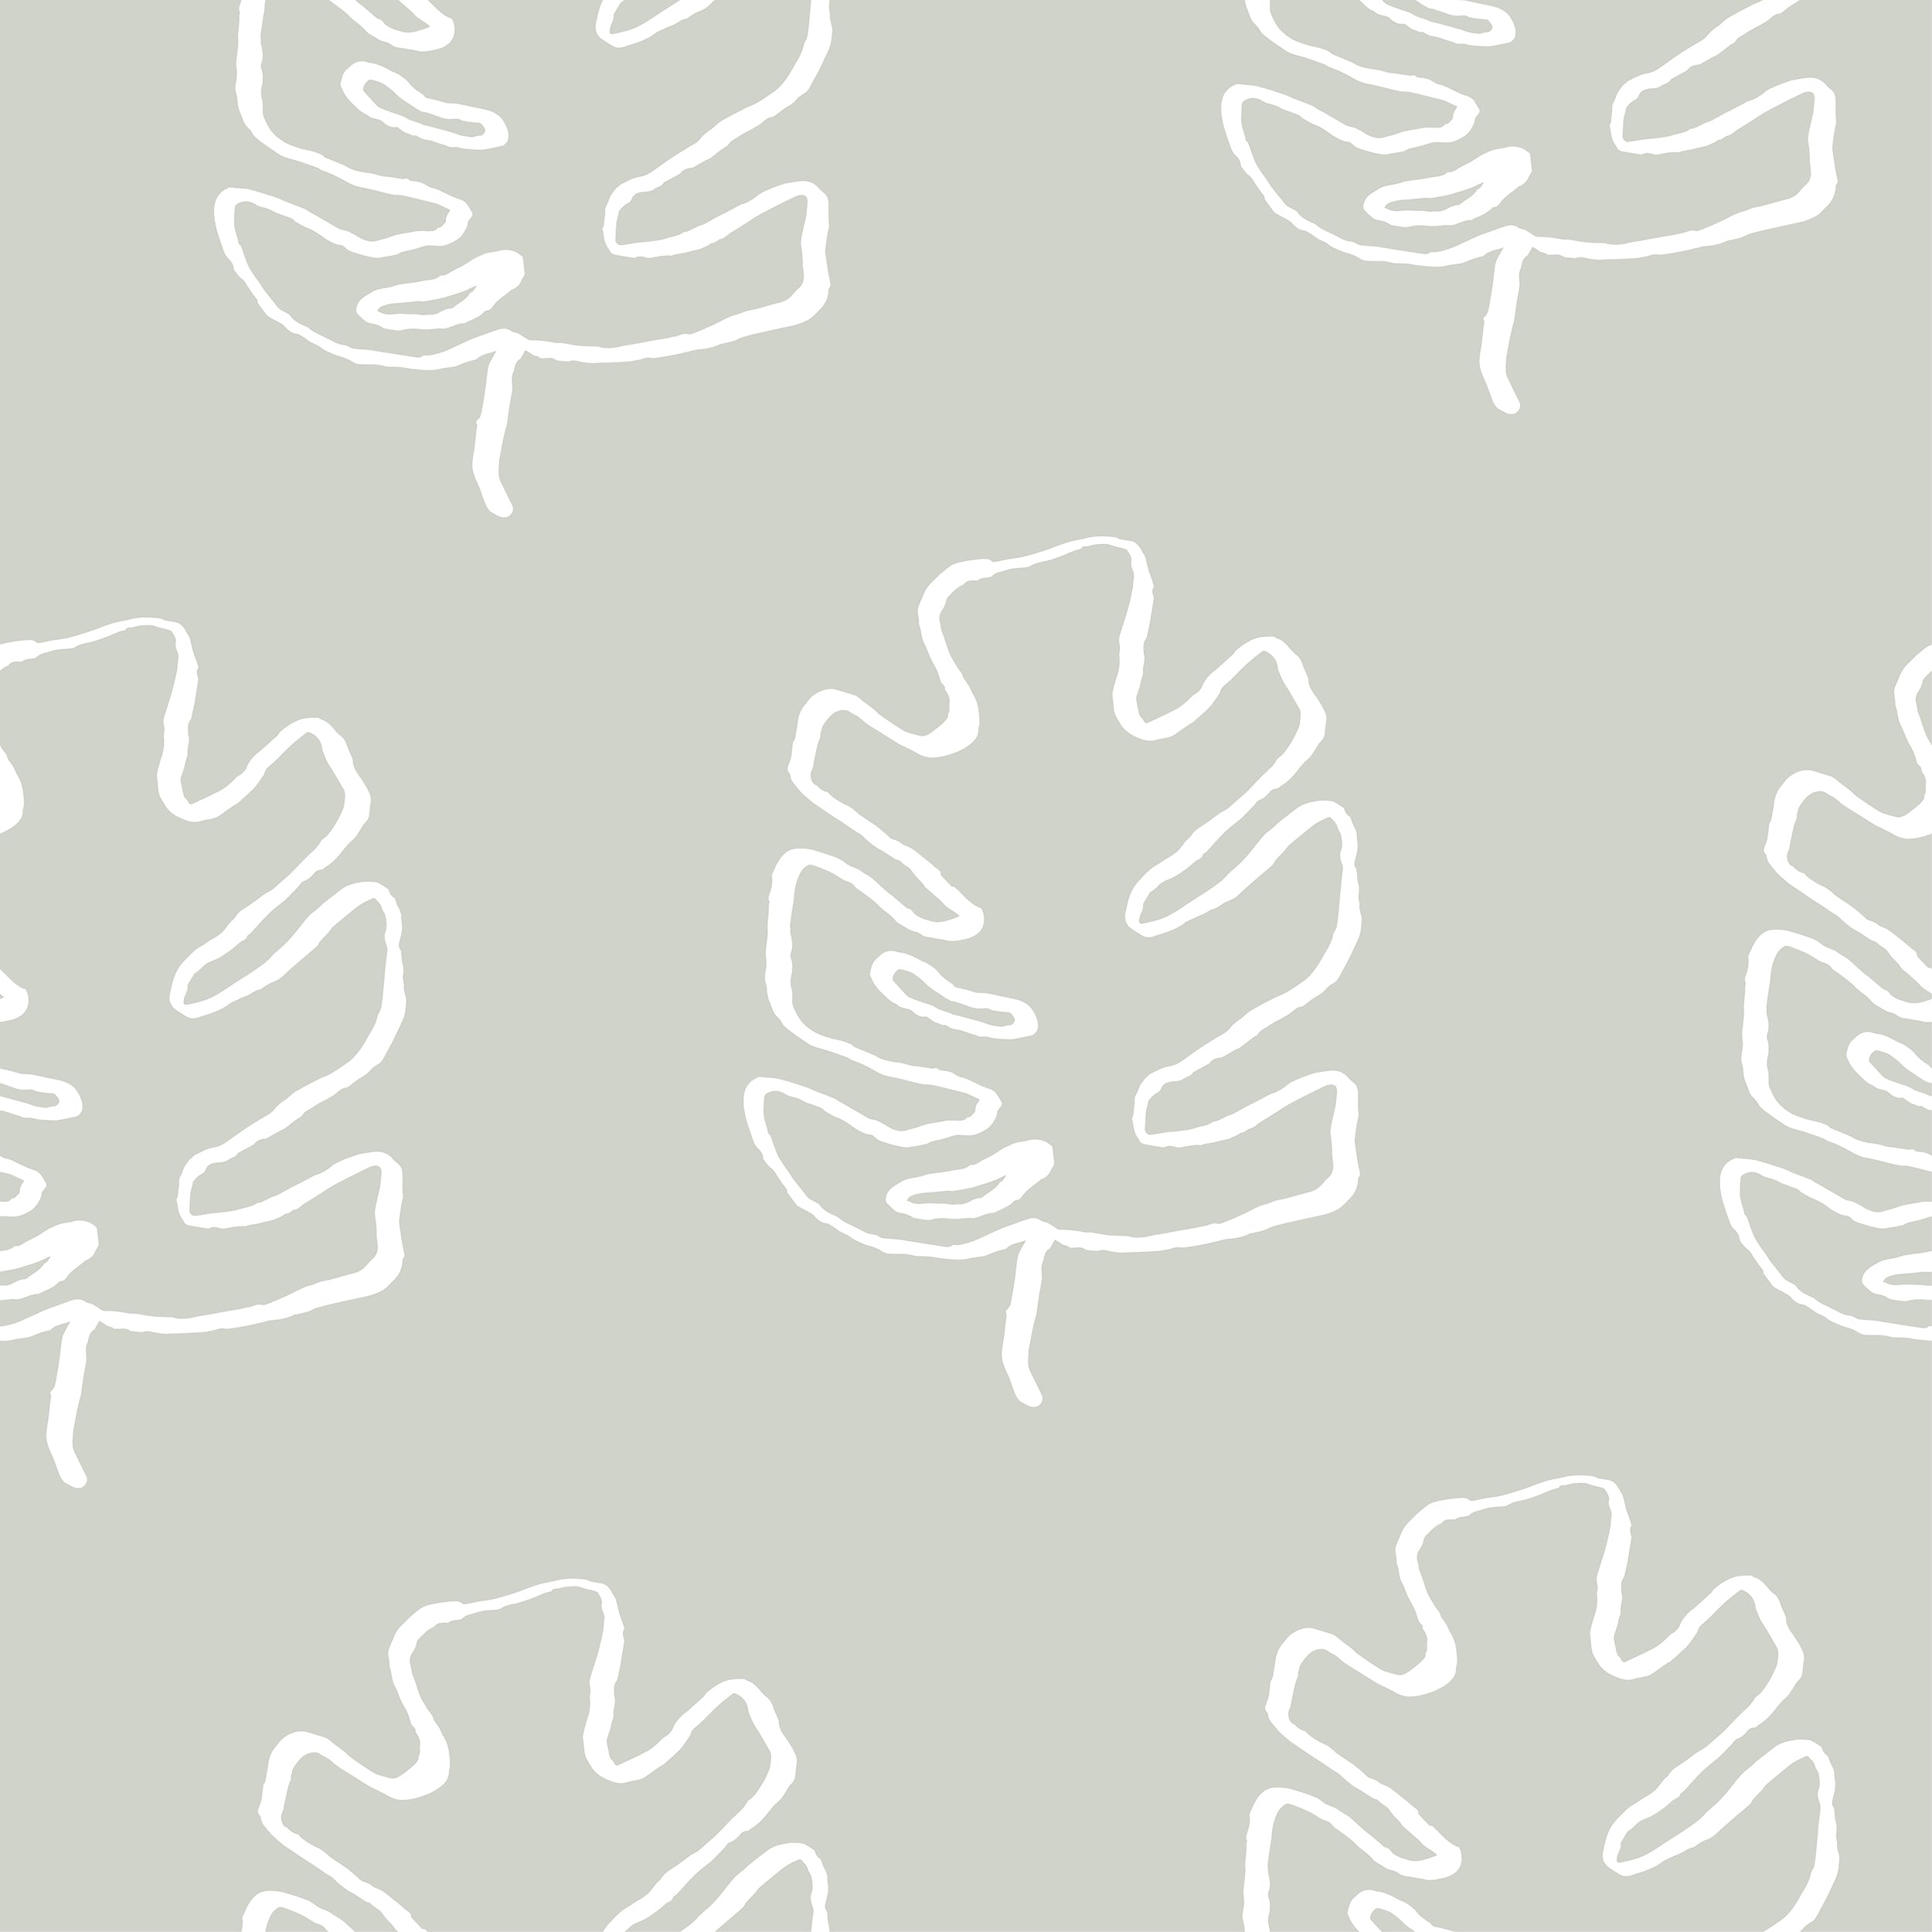 The Palm Leaves Wallpaper showcases a minimalistic design of outlined palm leaf sketches in white on a soft grey background, offering a contemporary and calm aesthetic suitable for modern decor styles.